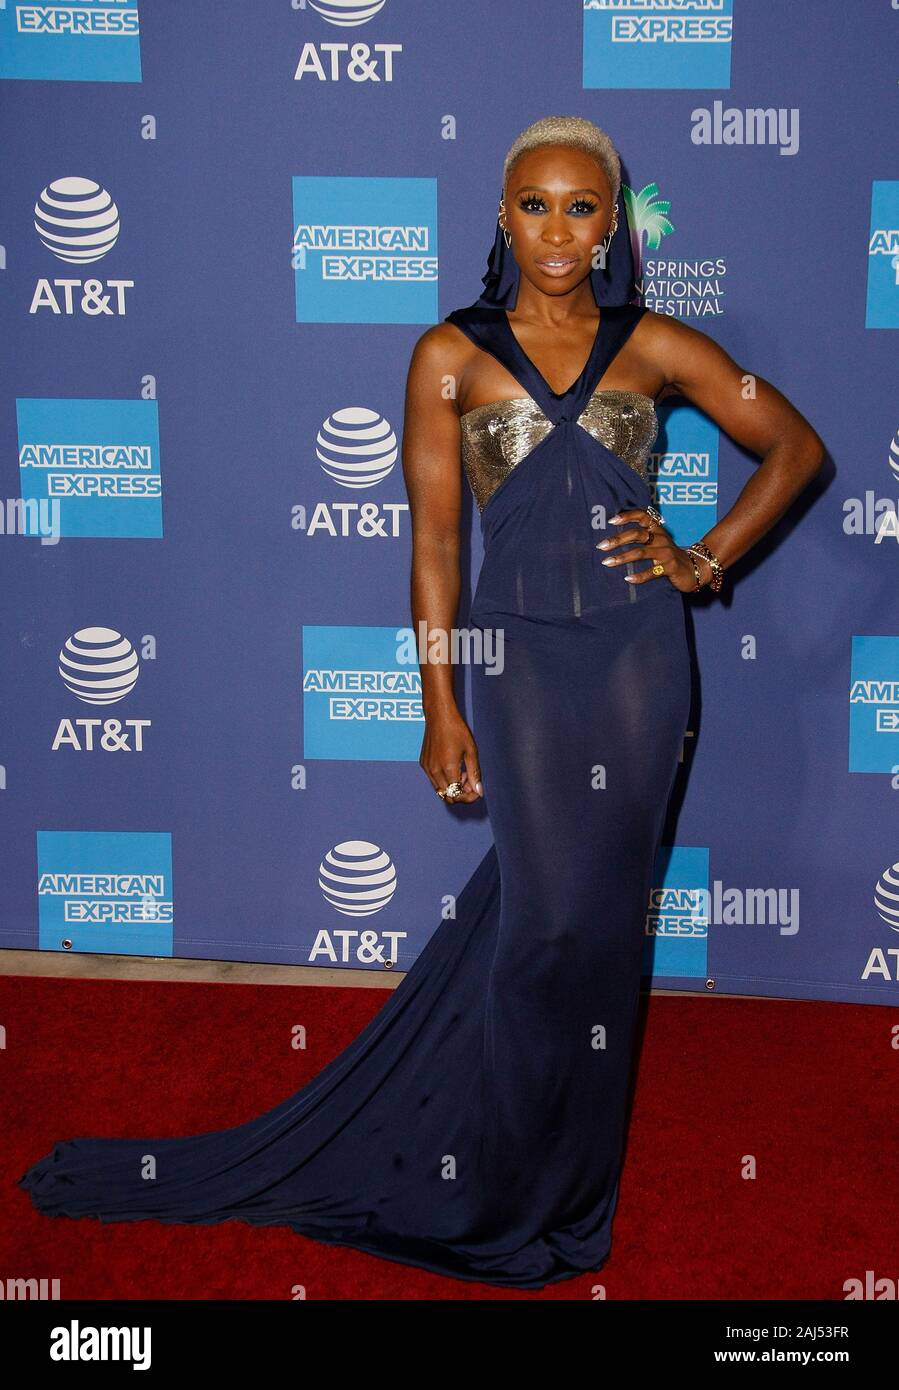 Palm Springs, California, USA. 2nd January, 2020. Cynthia Erivo attends the 31st Annual Palm Springs International Film Festival Film Awards Gala at Palm Springs Convention Center on January 02, 2020 in Palm Springs, California. Photo: CraSH/imageSPACE/MediaPunch Credit: MediaPunch Inc/Alamy Live News Stock Photo